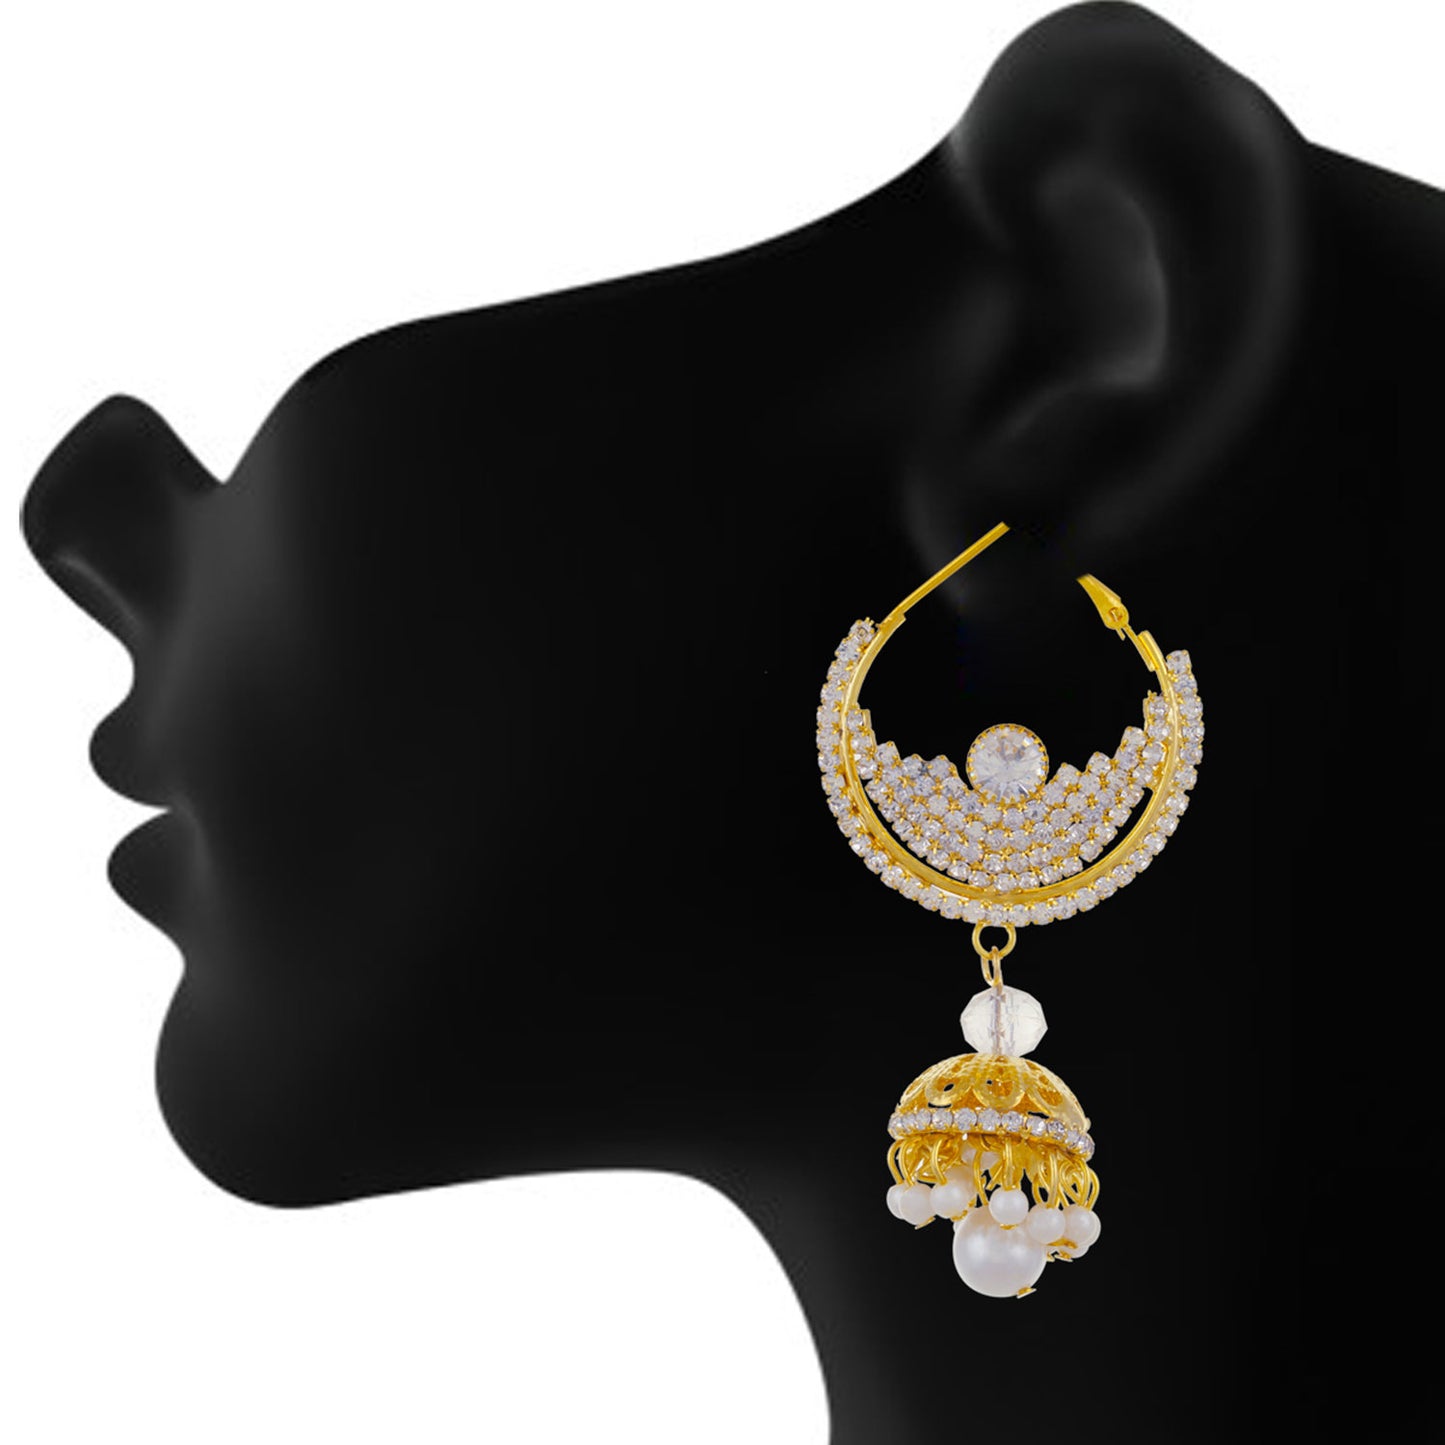 Gold plated Alloy Chandbali Jhumki Earrings Fashion Imitaion Jewelry for Girls and Women